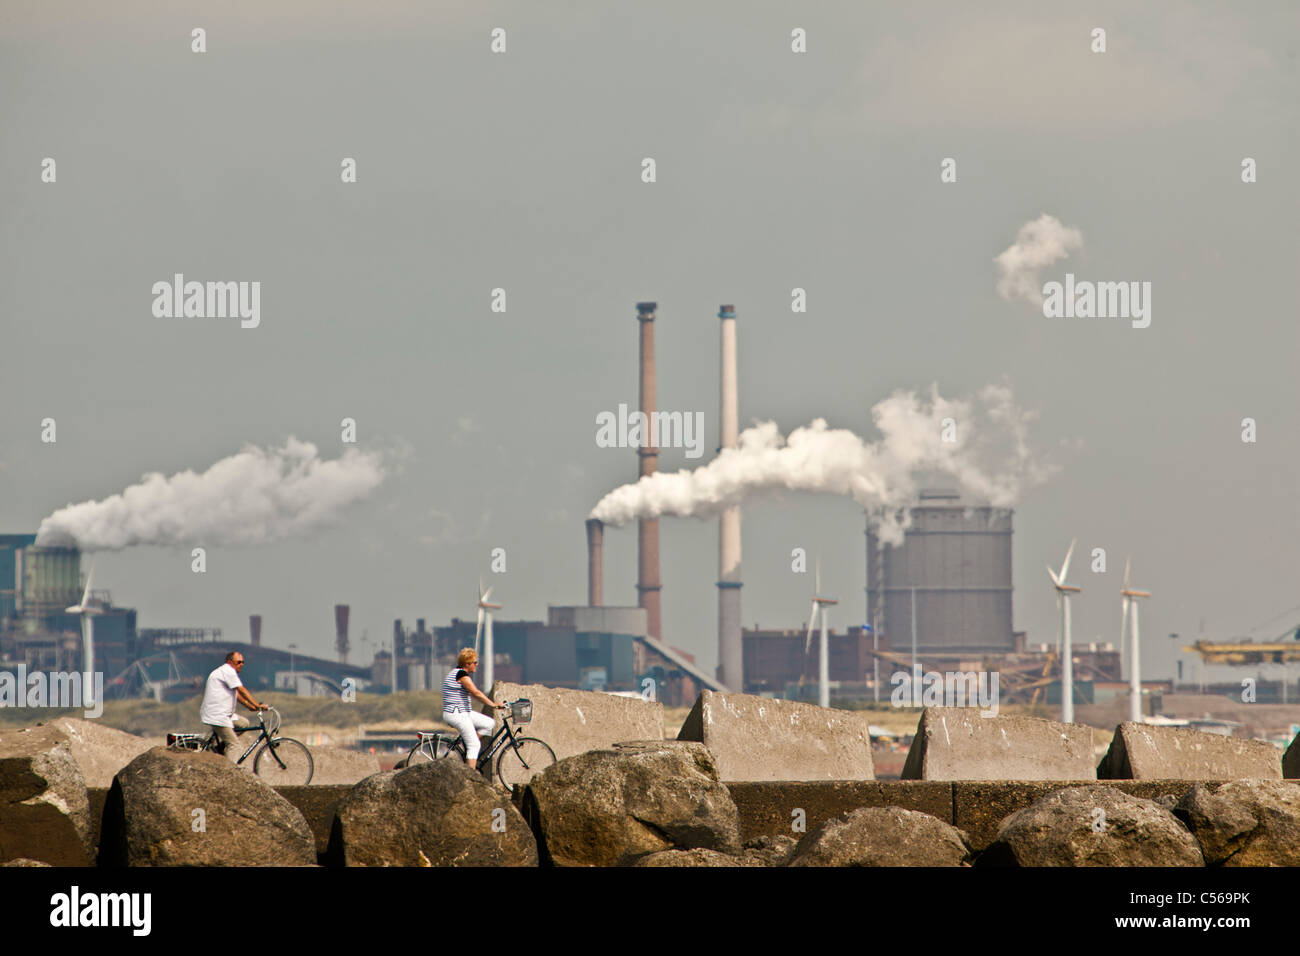 The Netherlands, IJmuiden, Woman and man cycling on pier. Background Tata Steel factory, blast furnaces. Stock Photo